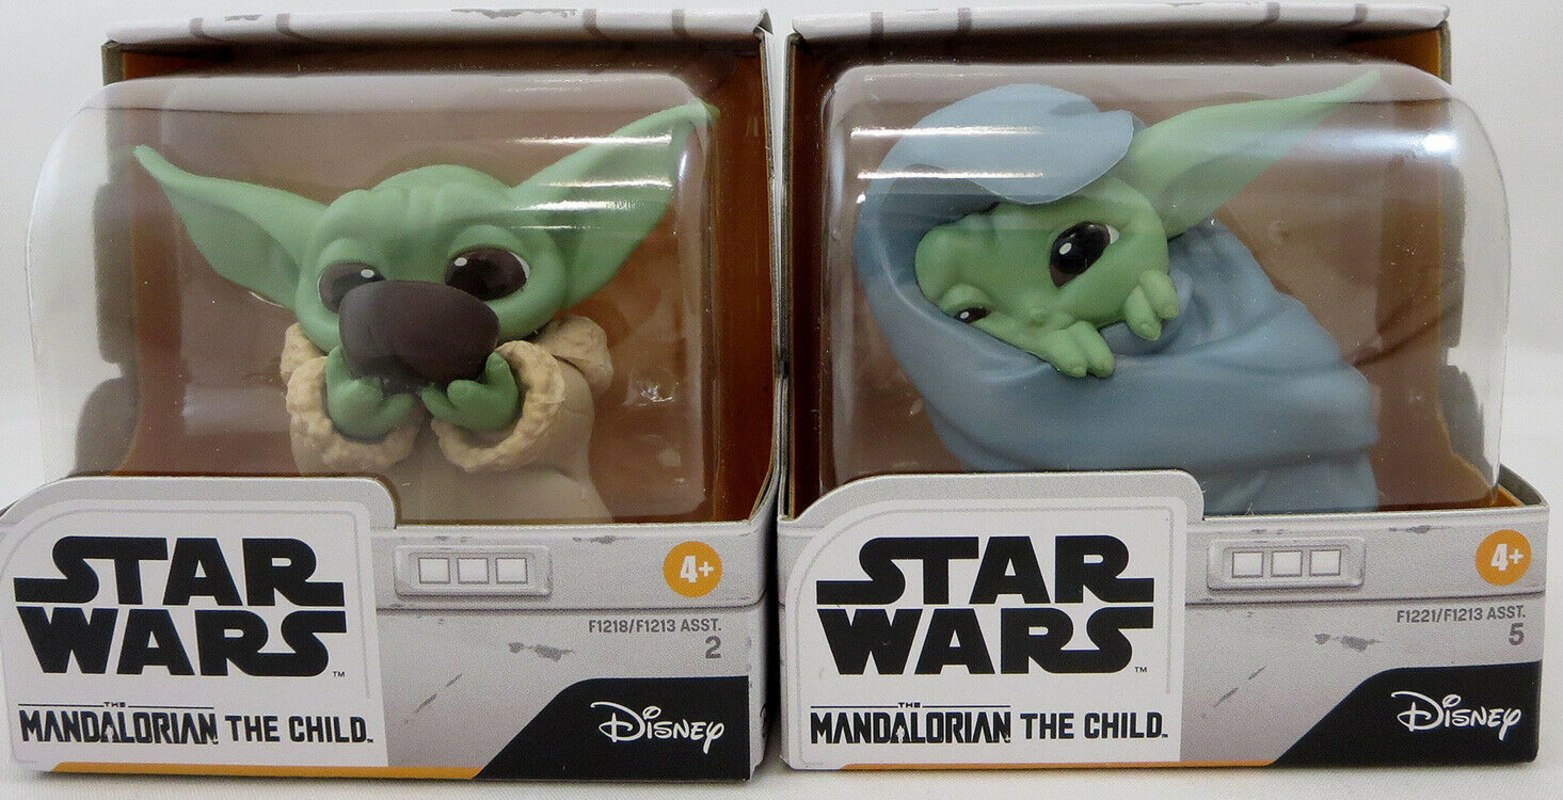 Star Wars Mandalorian The Child Bounty Collection Sipping Soup Baby Yoda Figure 